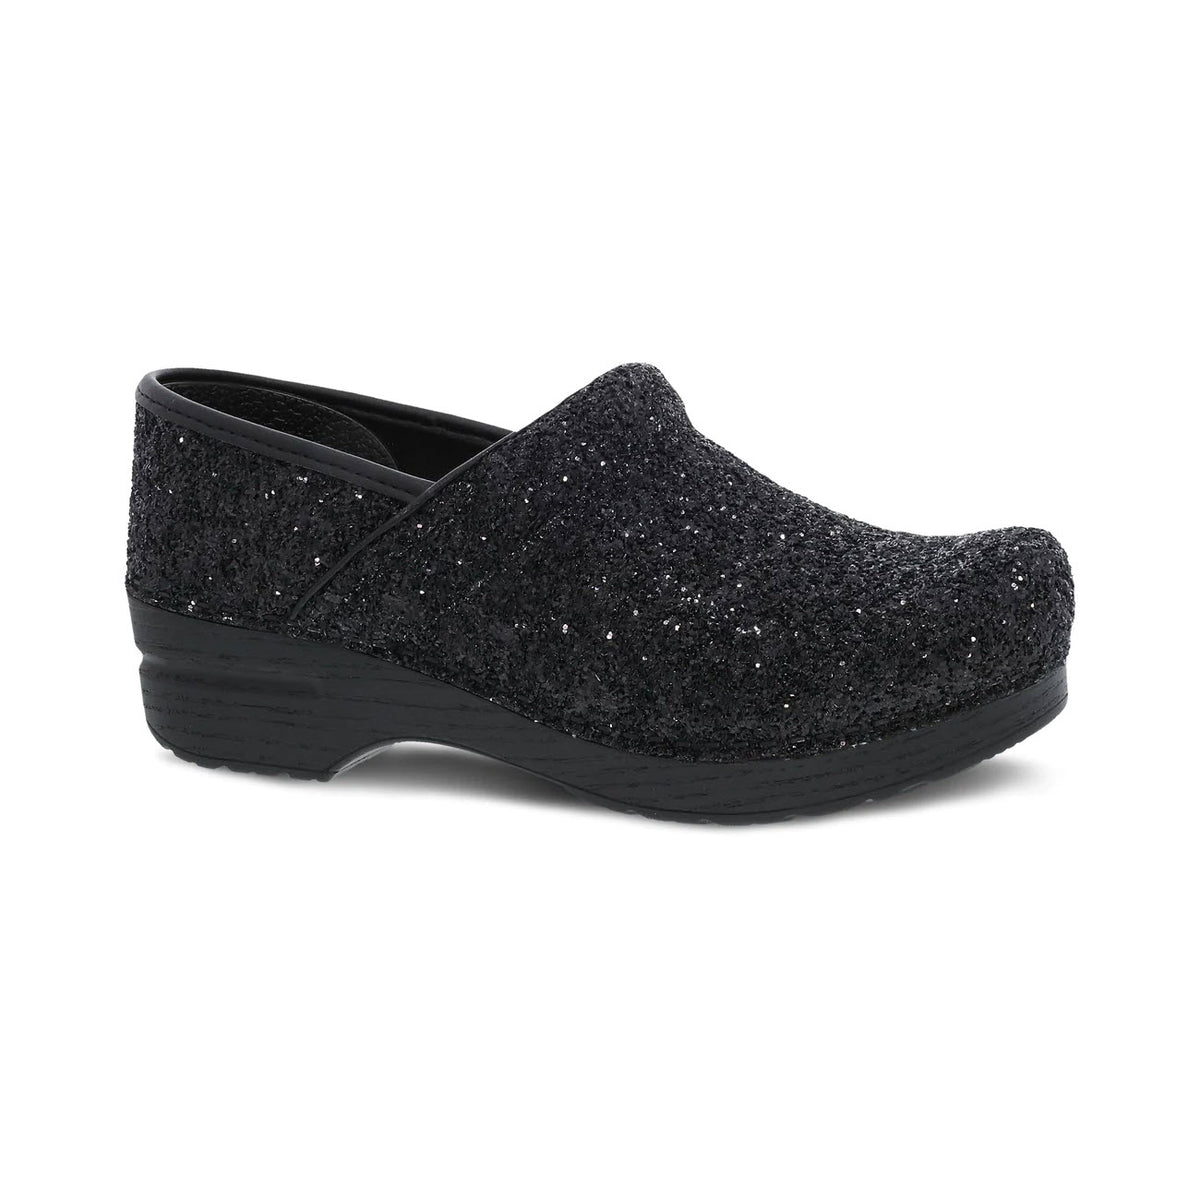 A Dansko Prof Black Glitter clog with a moderate heel and rounded toe, isolated on a white background.